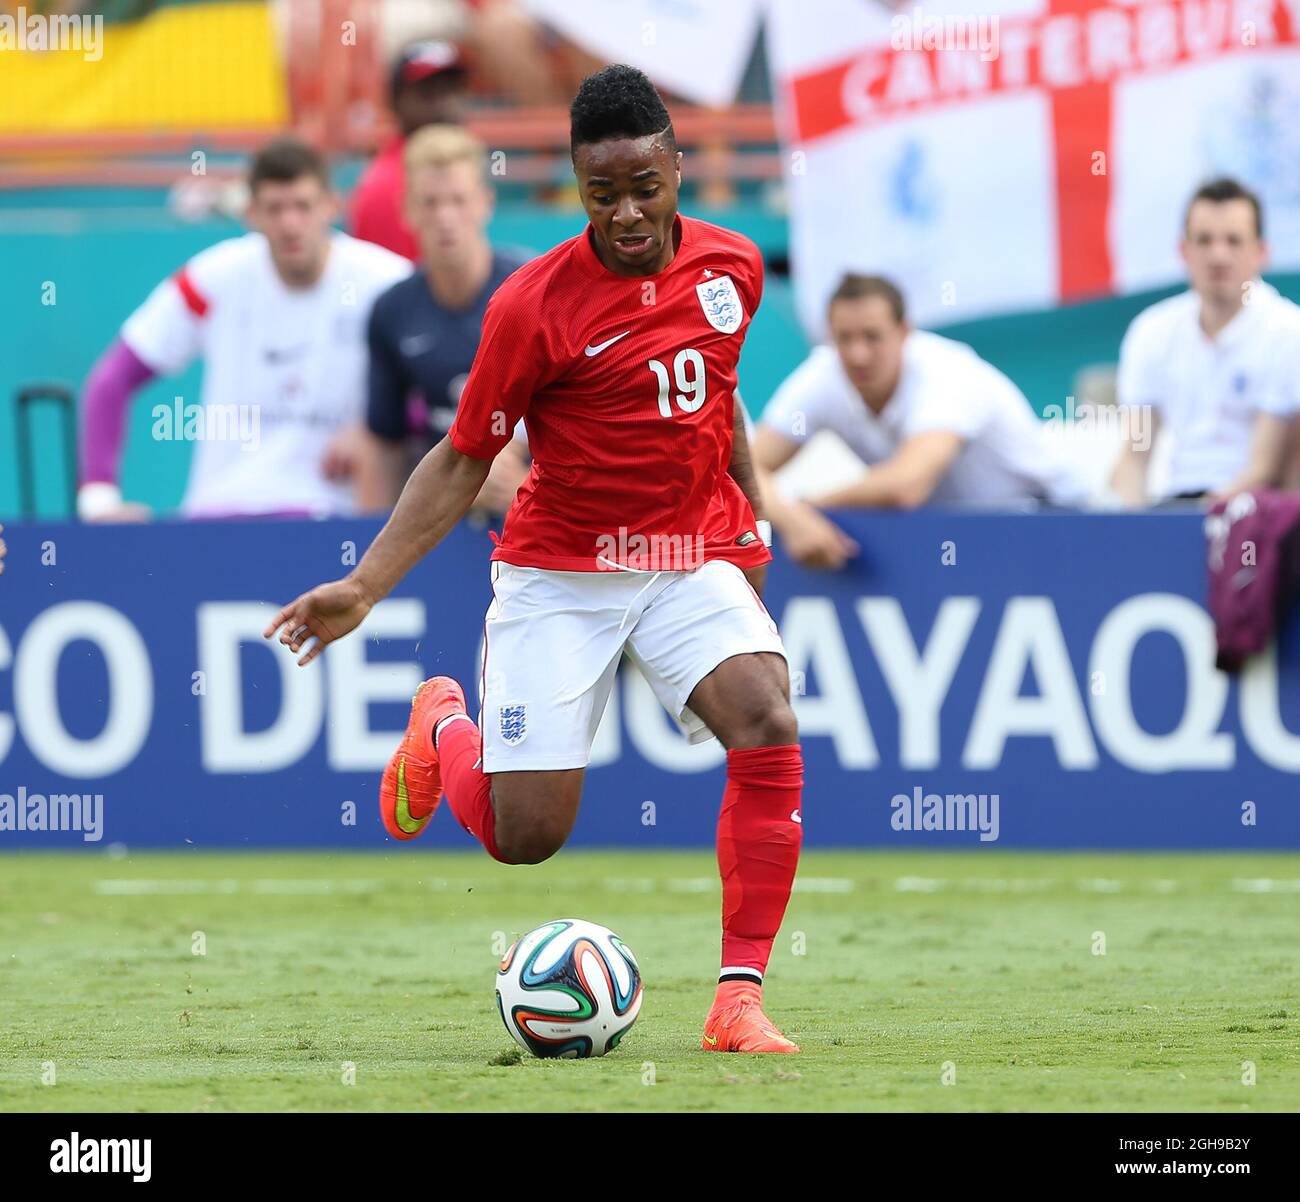 England's Raheem Sterling in action during the International Friendly match between England and Ecuador held at Sun Life Stadium in Miami, USA on June 4, 2014. Pic David Klein/Sportimage. Stock Photo